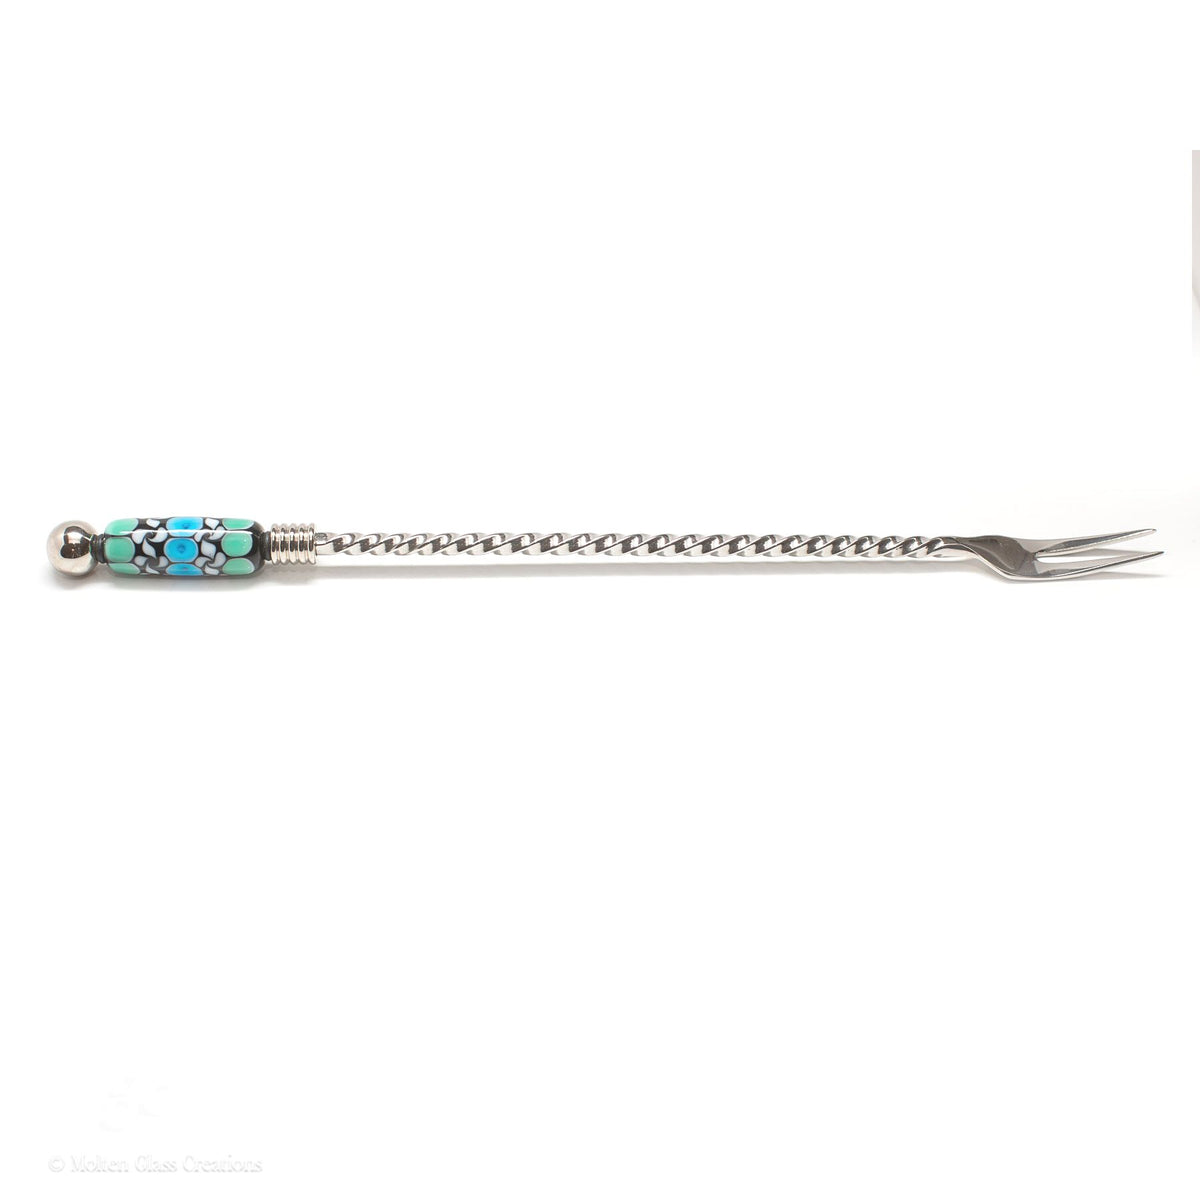 Beaded Pickle Fork - Blue and Green Pattern